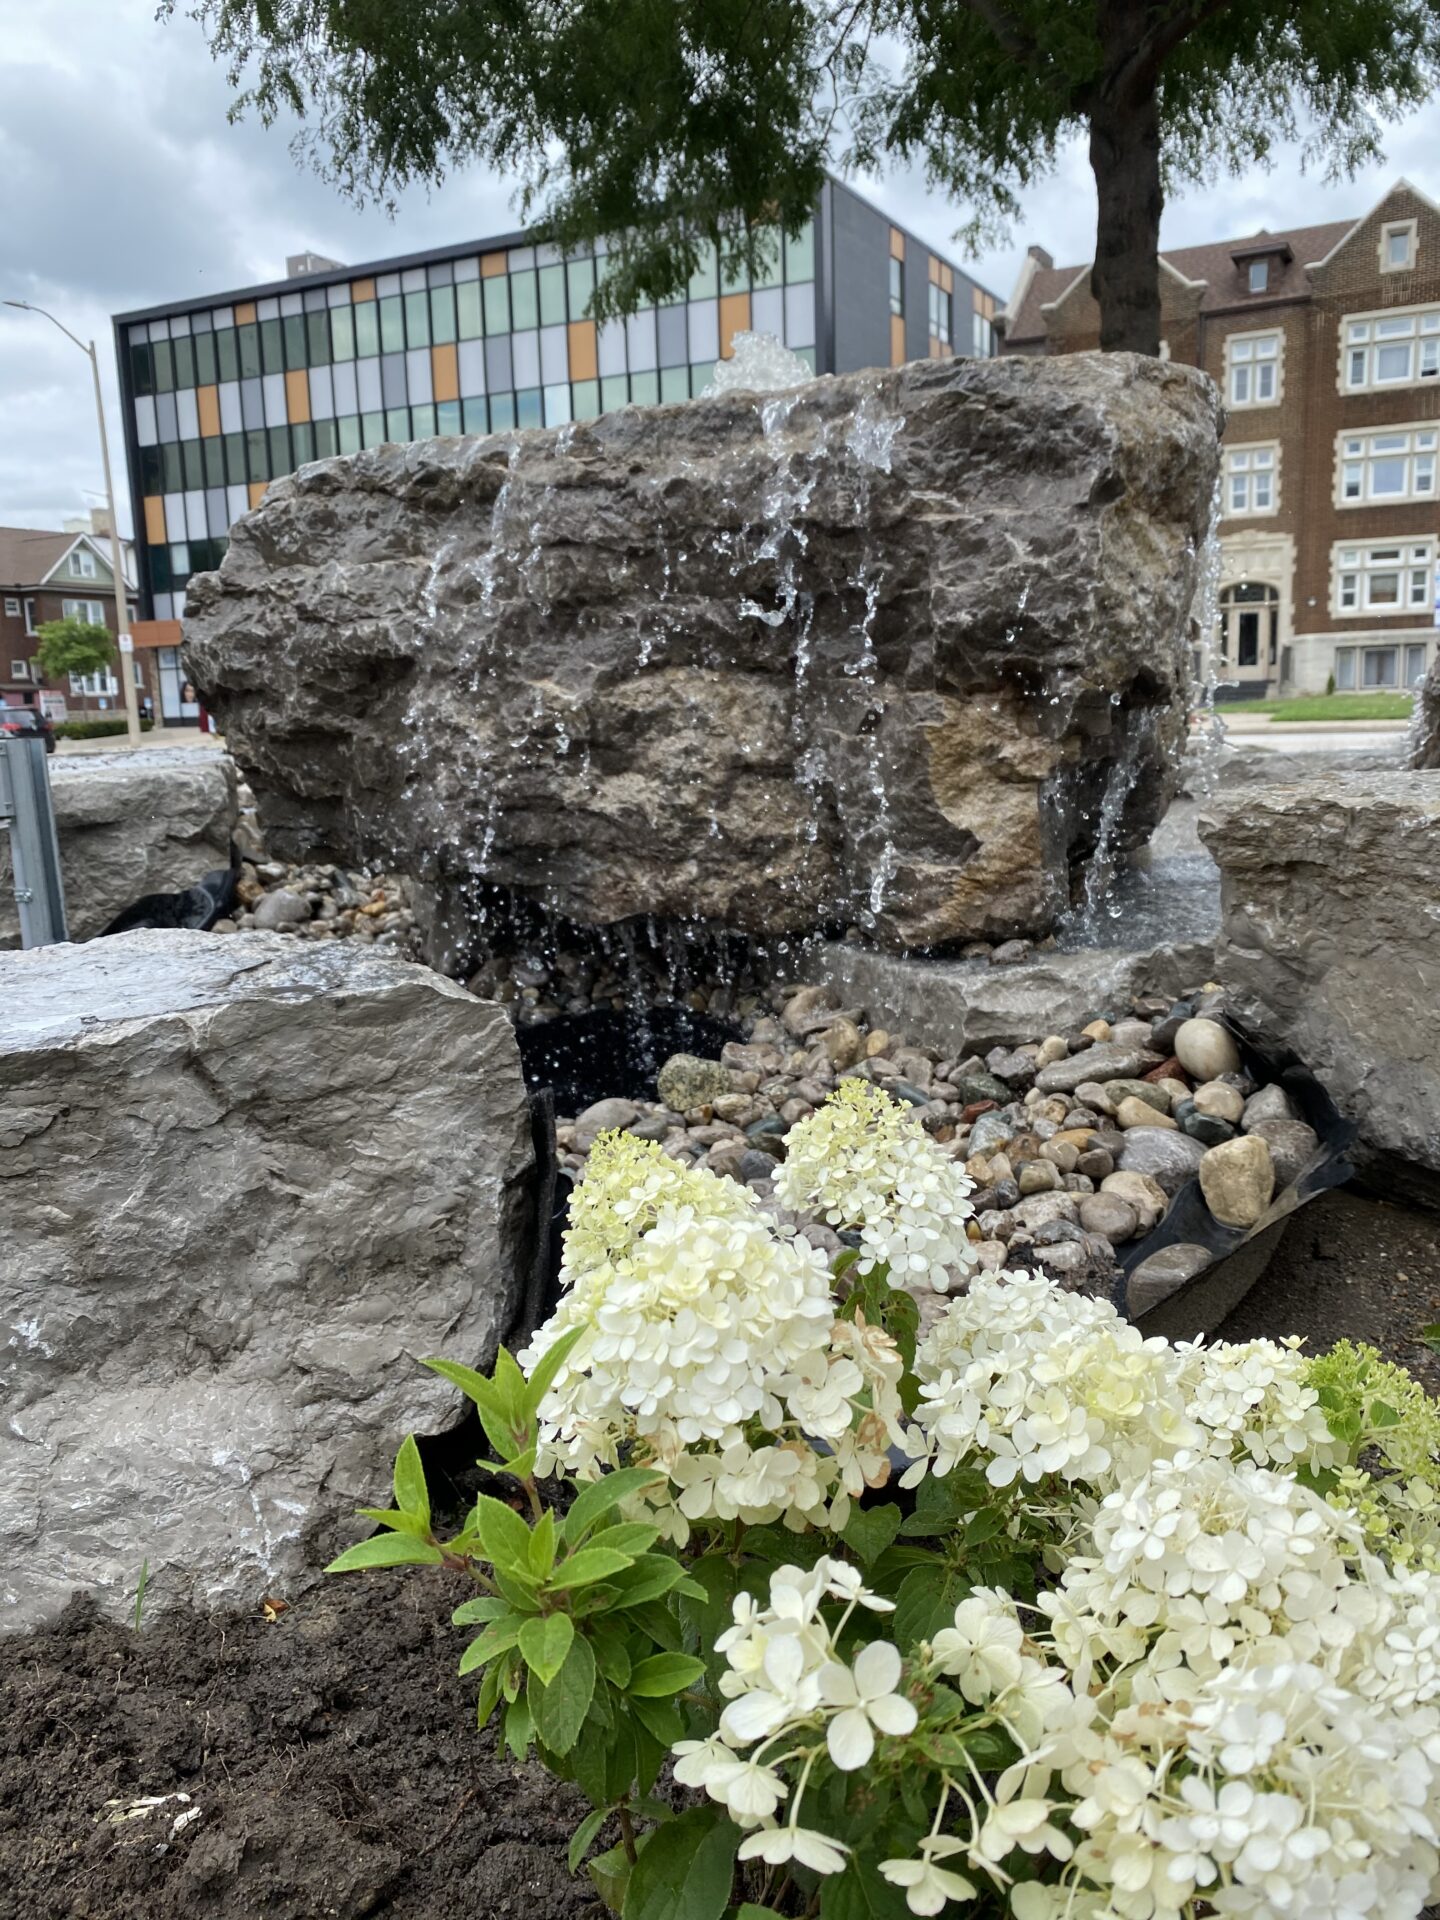 An artificial rock waterfall is surrounded by white flowers, with an urban background featuring modern and traditional architecture under a cloudy sky.